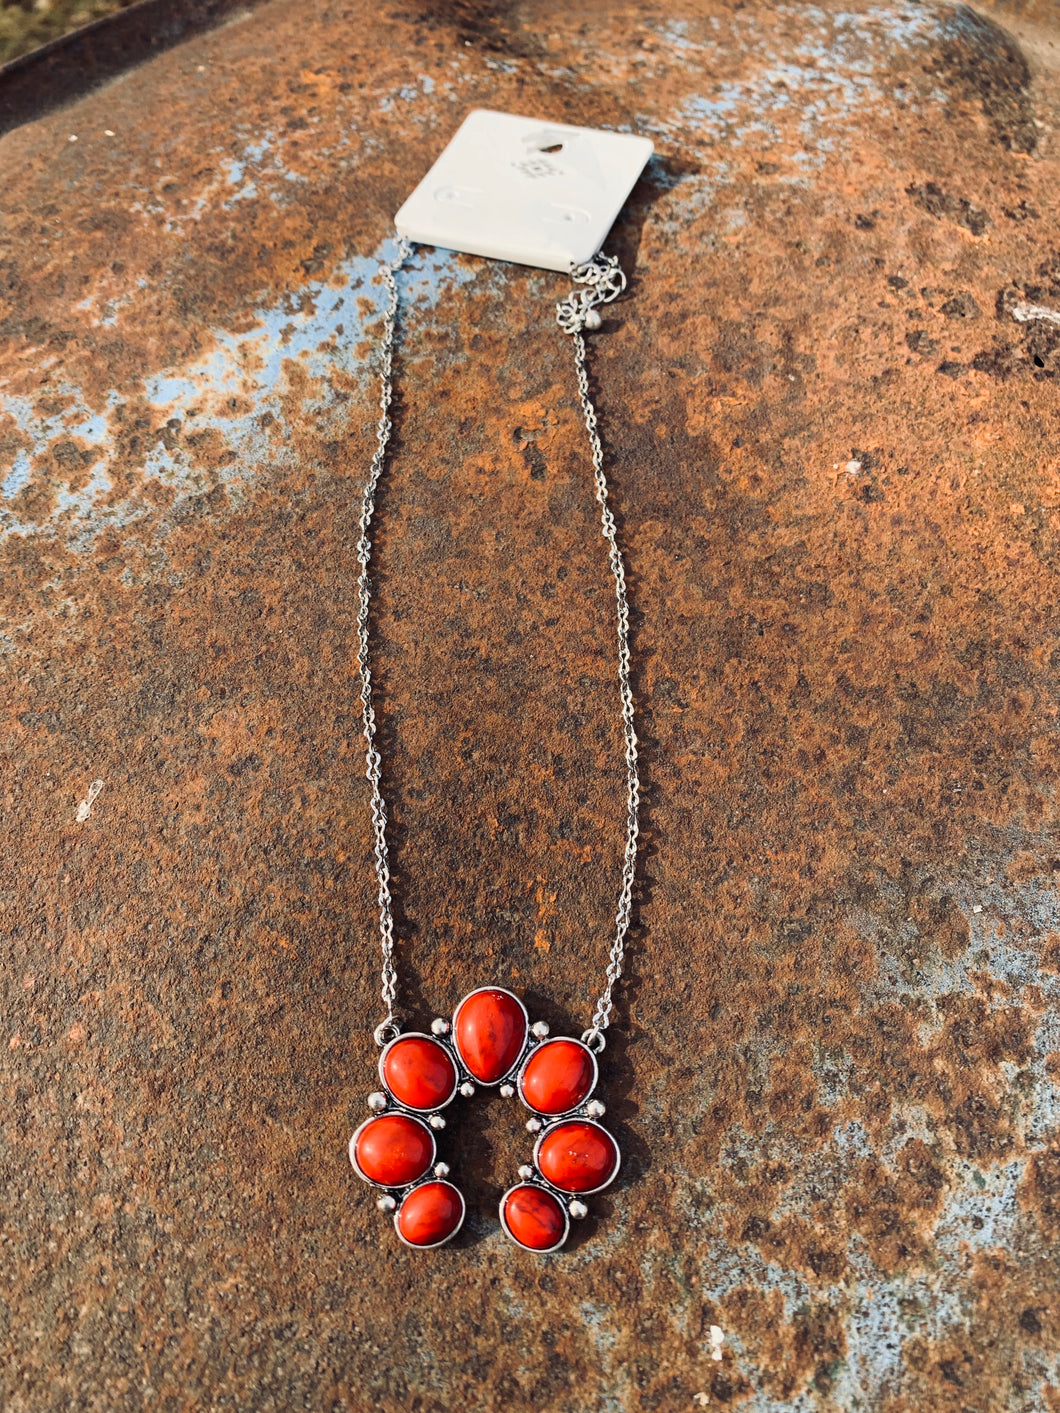 Simple red squash necklace